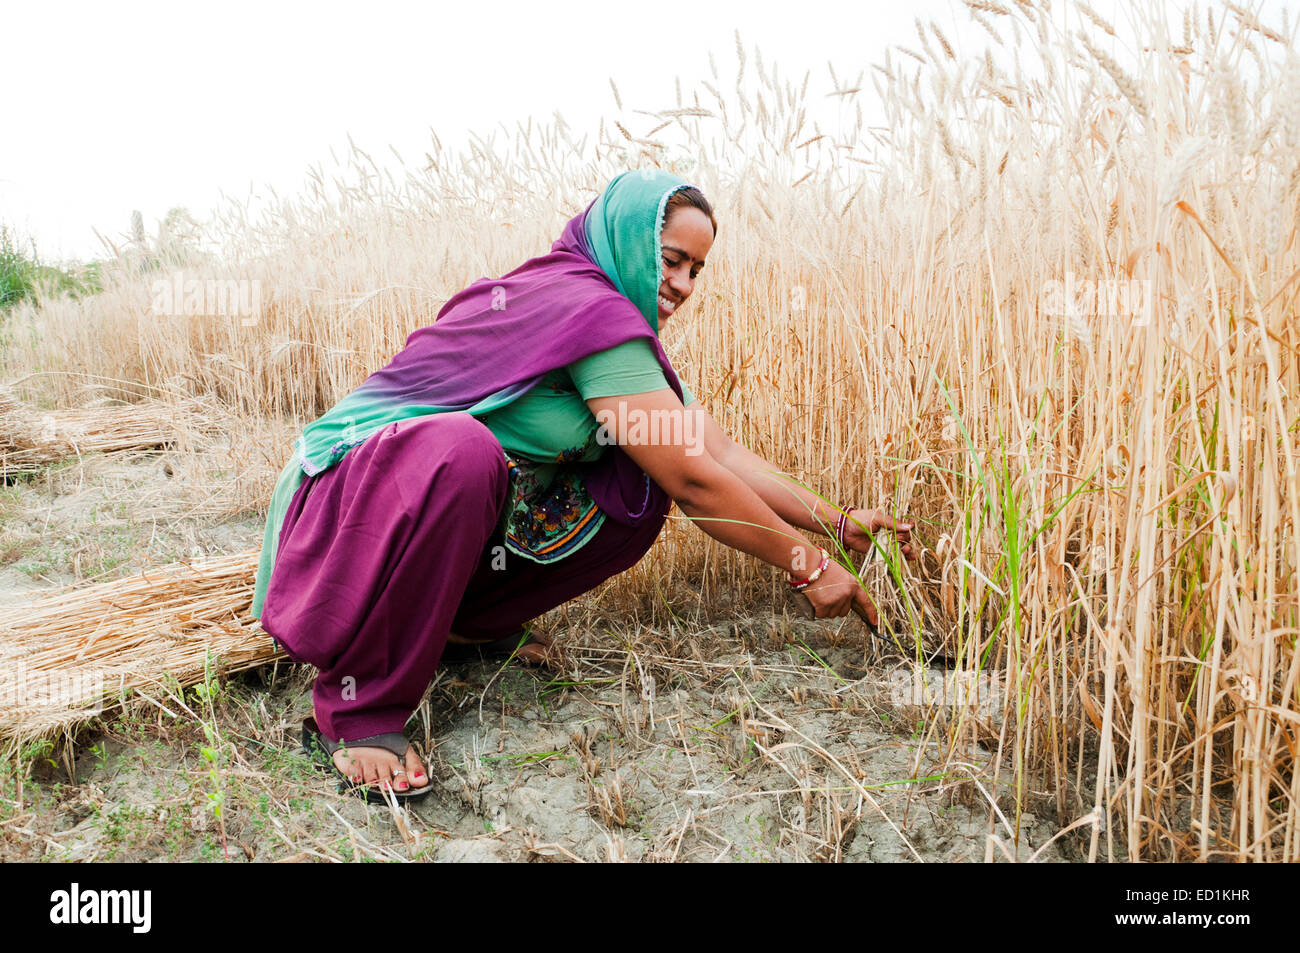 1 indian Village rural lady Cutting Wheat Stock Photo